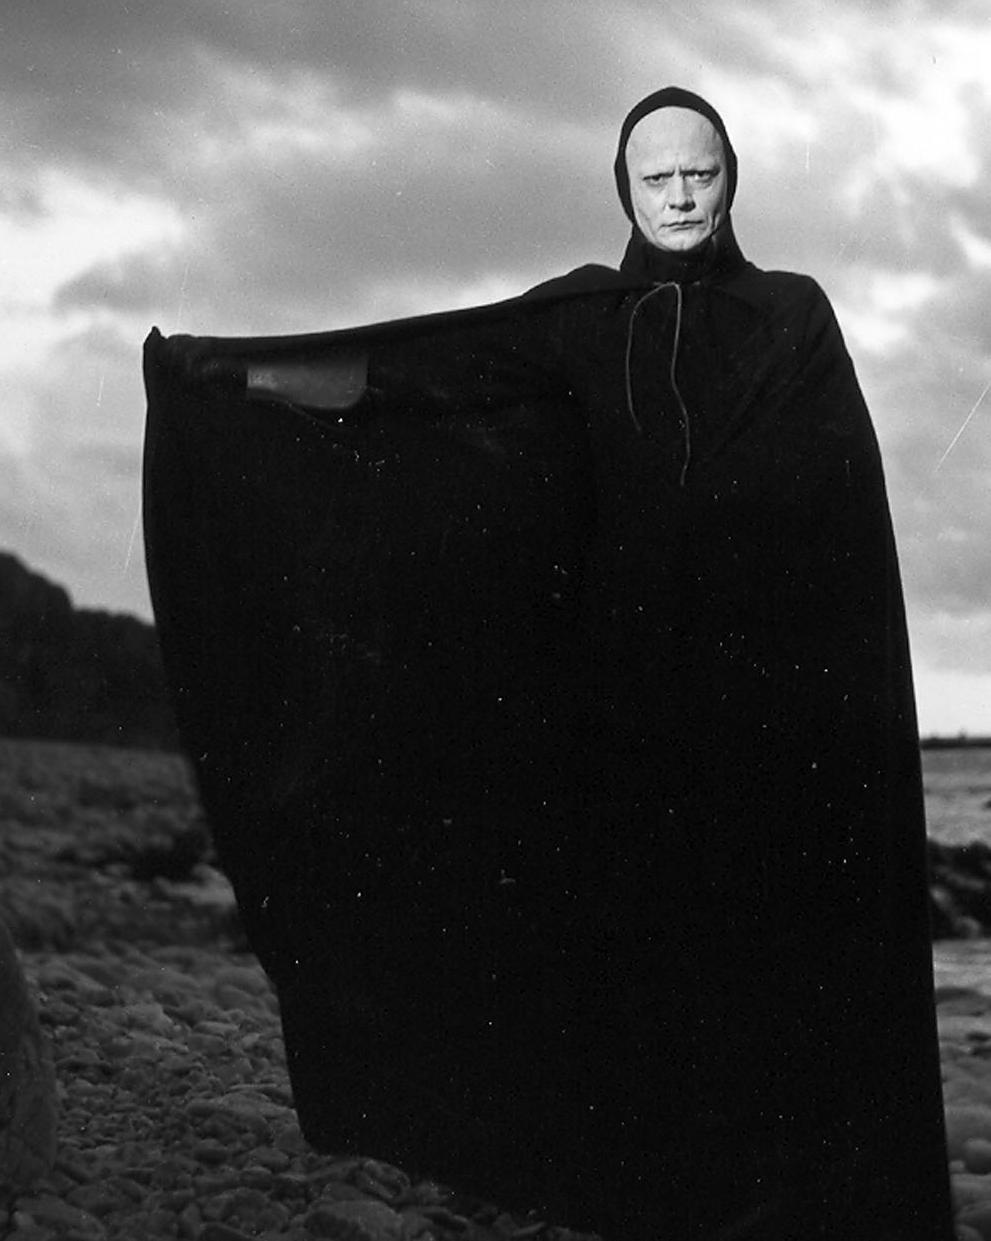 THE SEVENTH SEAL Released: 1957 Runtime: 96min Showing: 6:30pm Date: 15 Oct 2018 Venue: Century Cinemax Presented By: Jannike Åhlund, Swedish Film